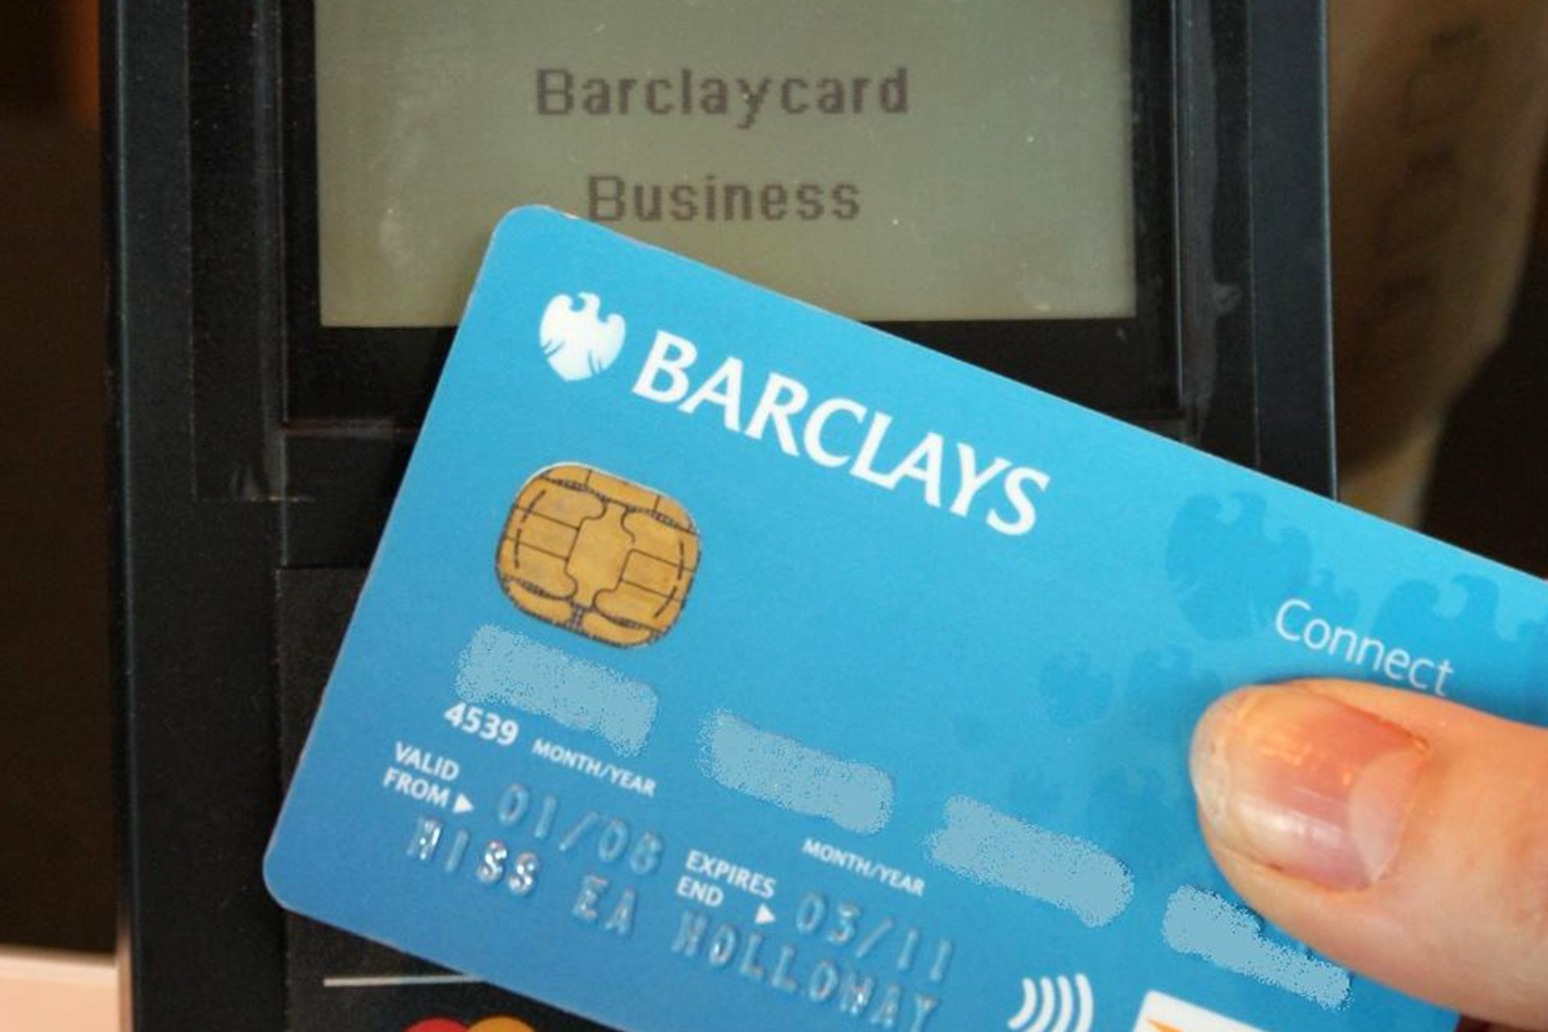 80% of 85 to 95-year-olds now pay contactless